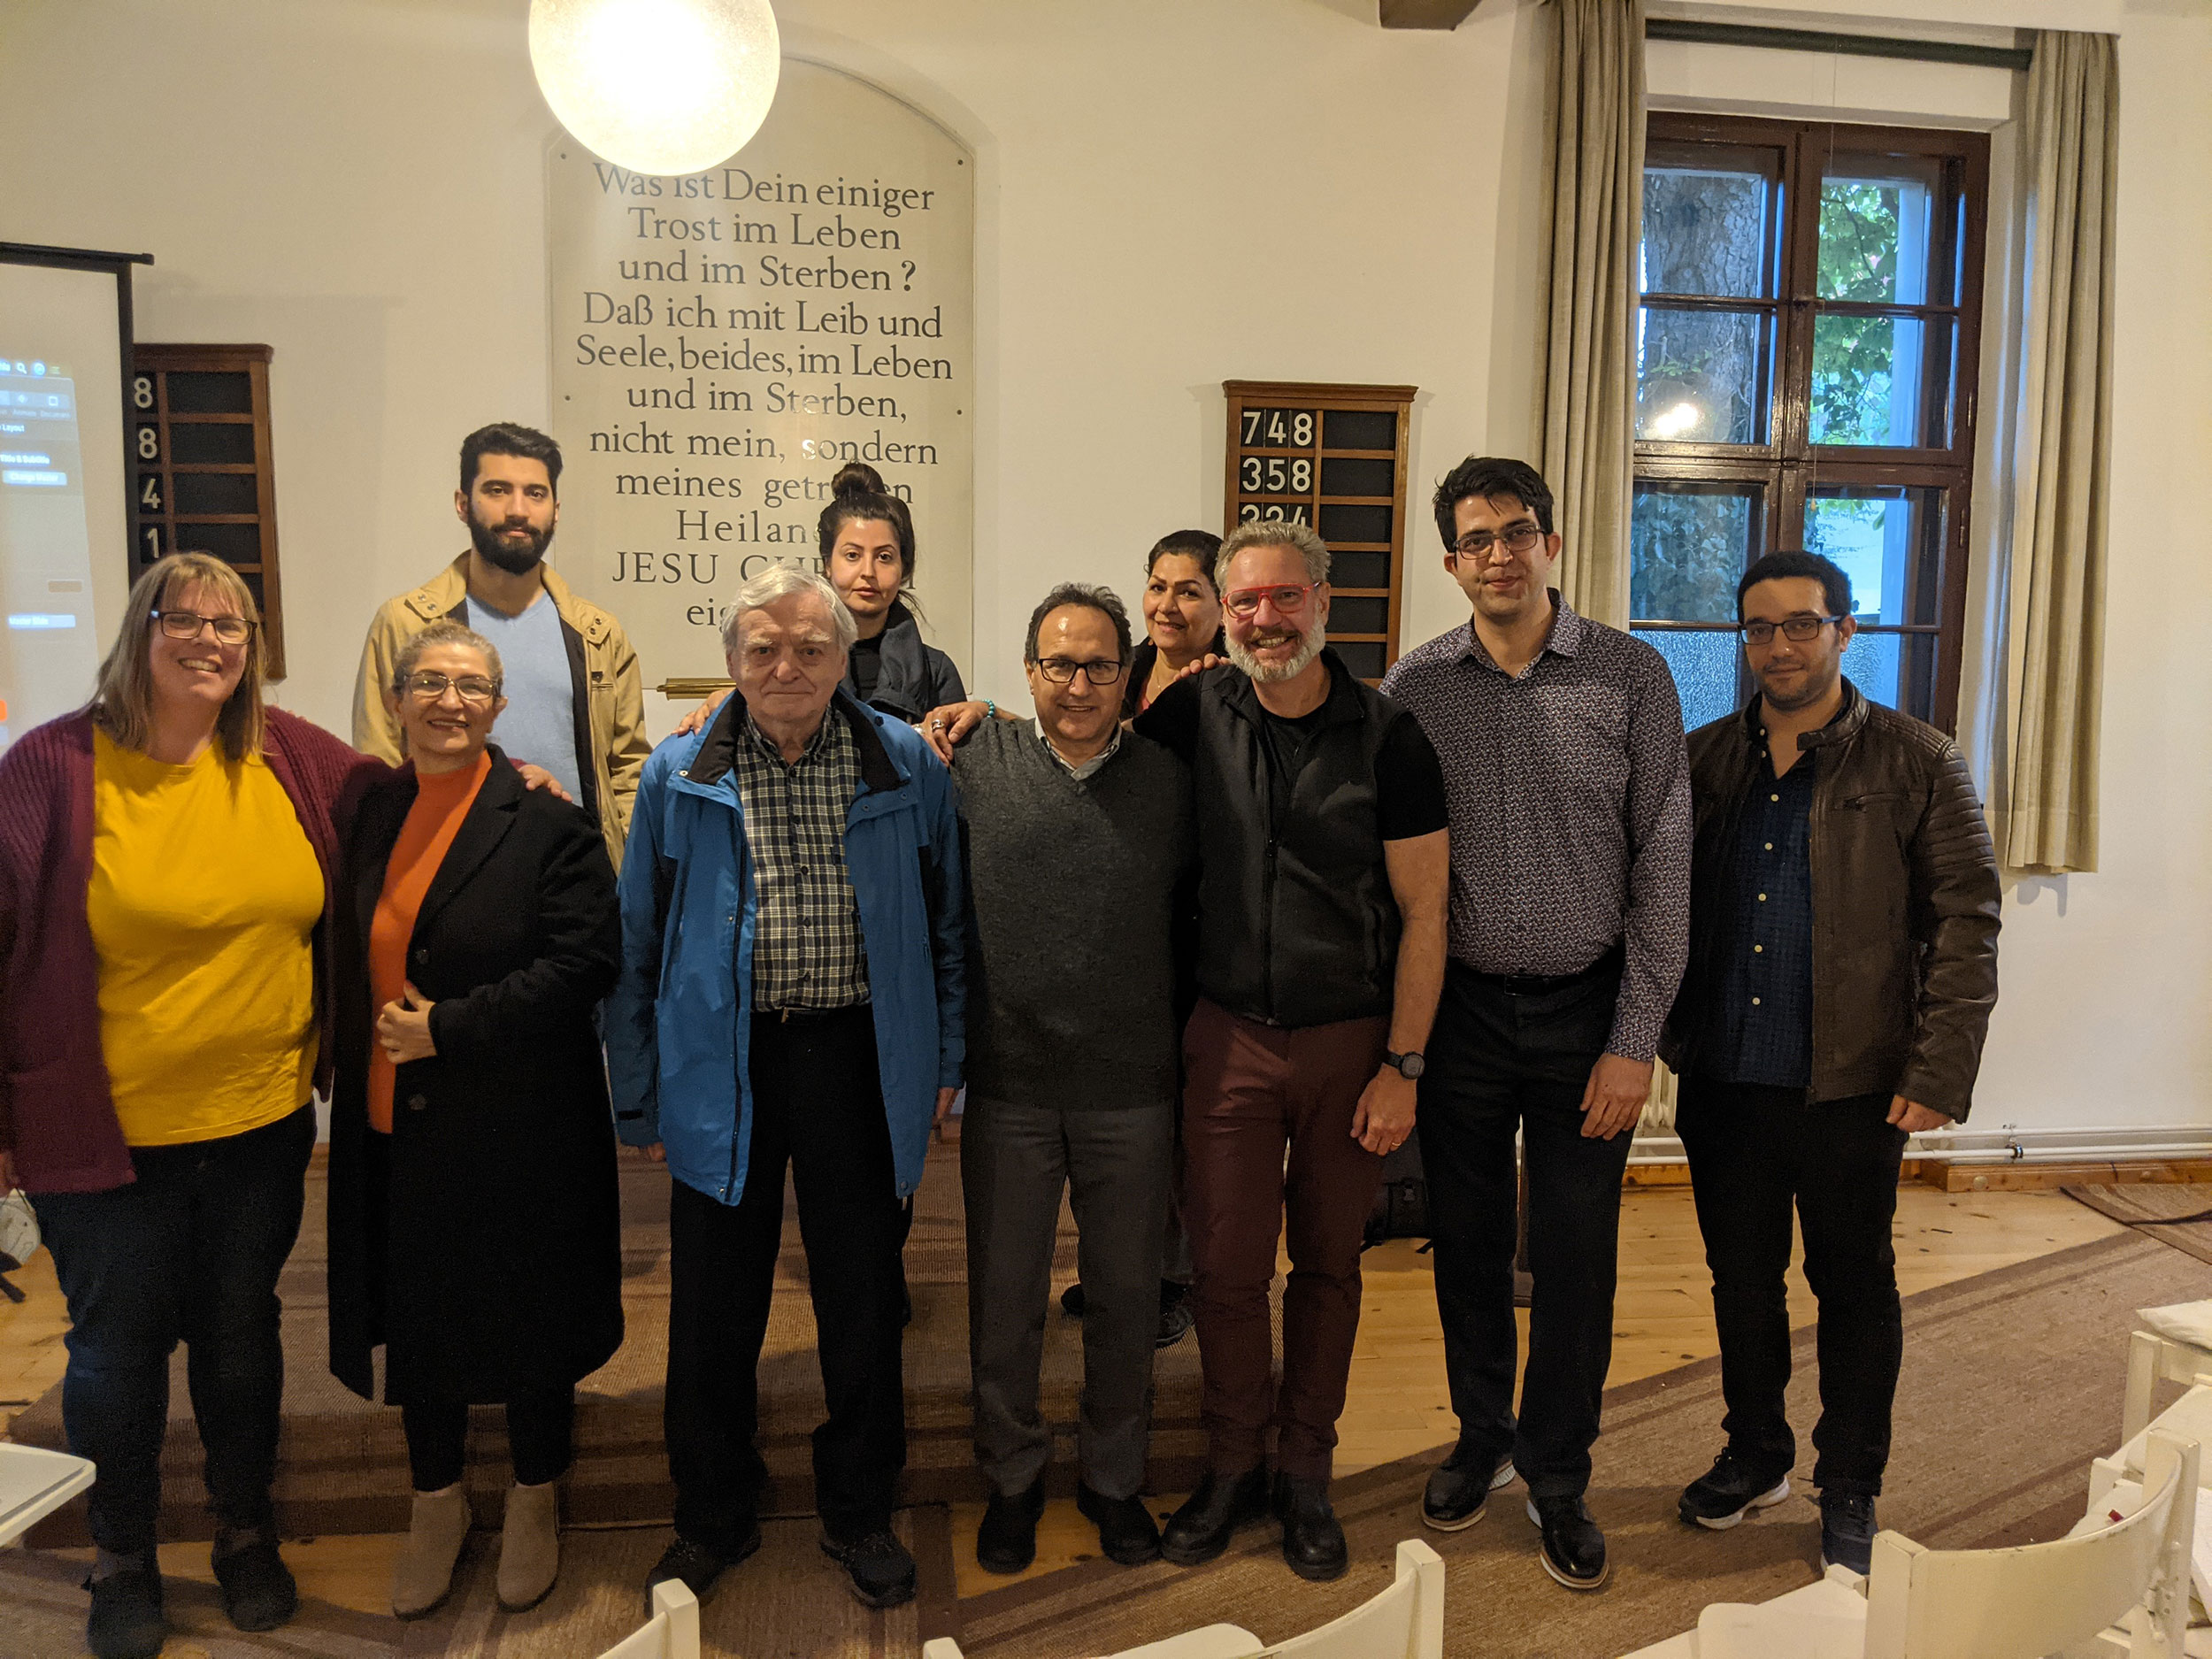 Participants at the workshop on The Ninefold Path of Jesus, many of whom are going to participate in an upcoming weekly course. (Photo: Lisa Scandrette)